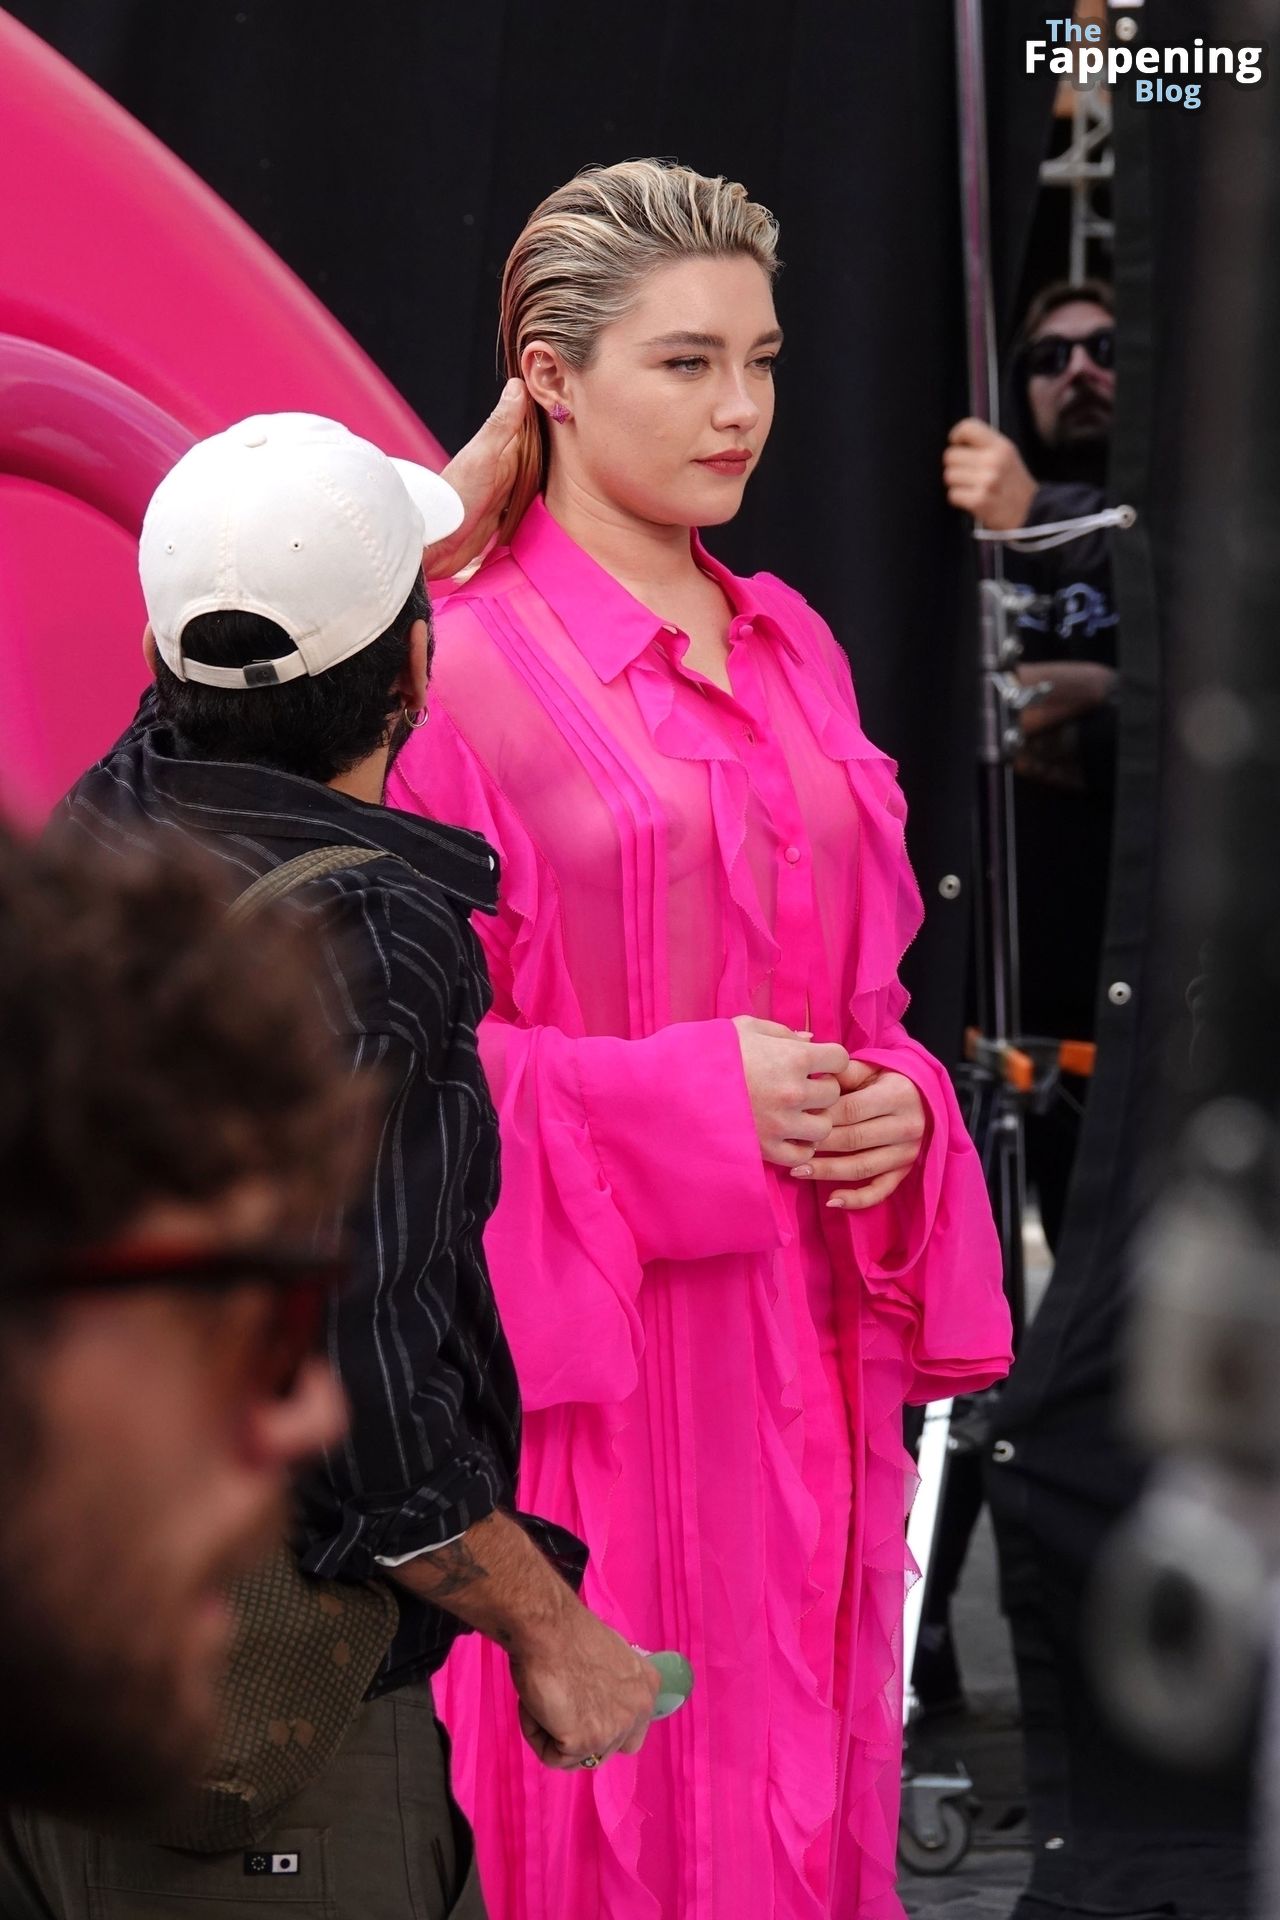 Florence-Pugh-Nude-Tits-The-Fappening-Blog-5.jpg